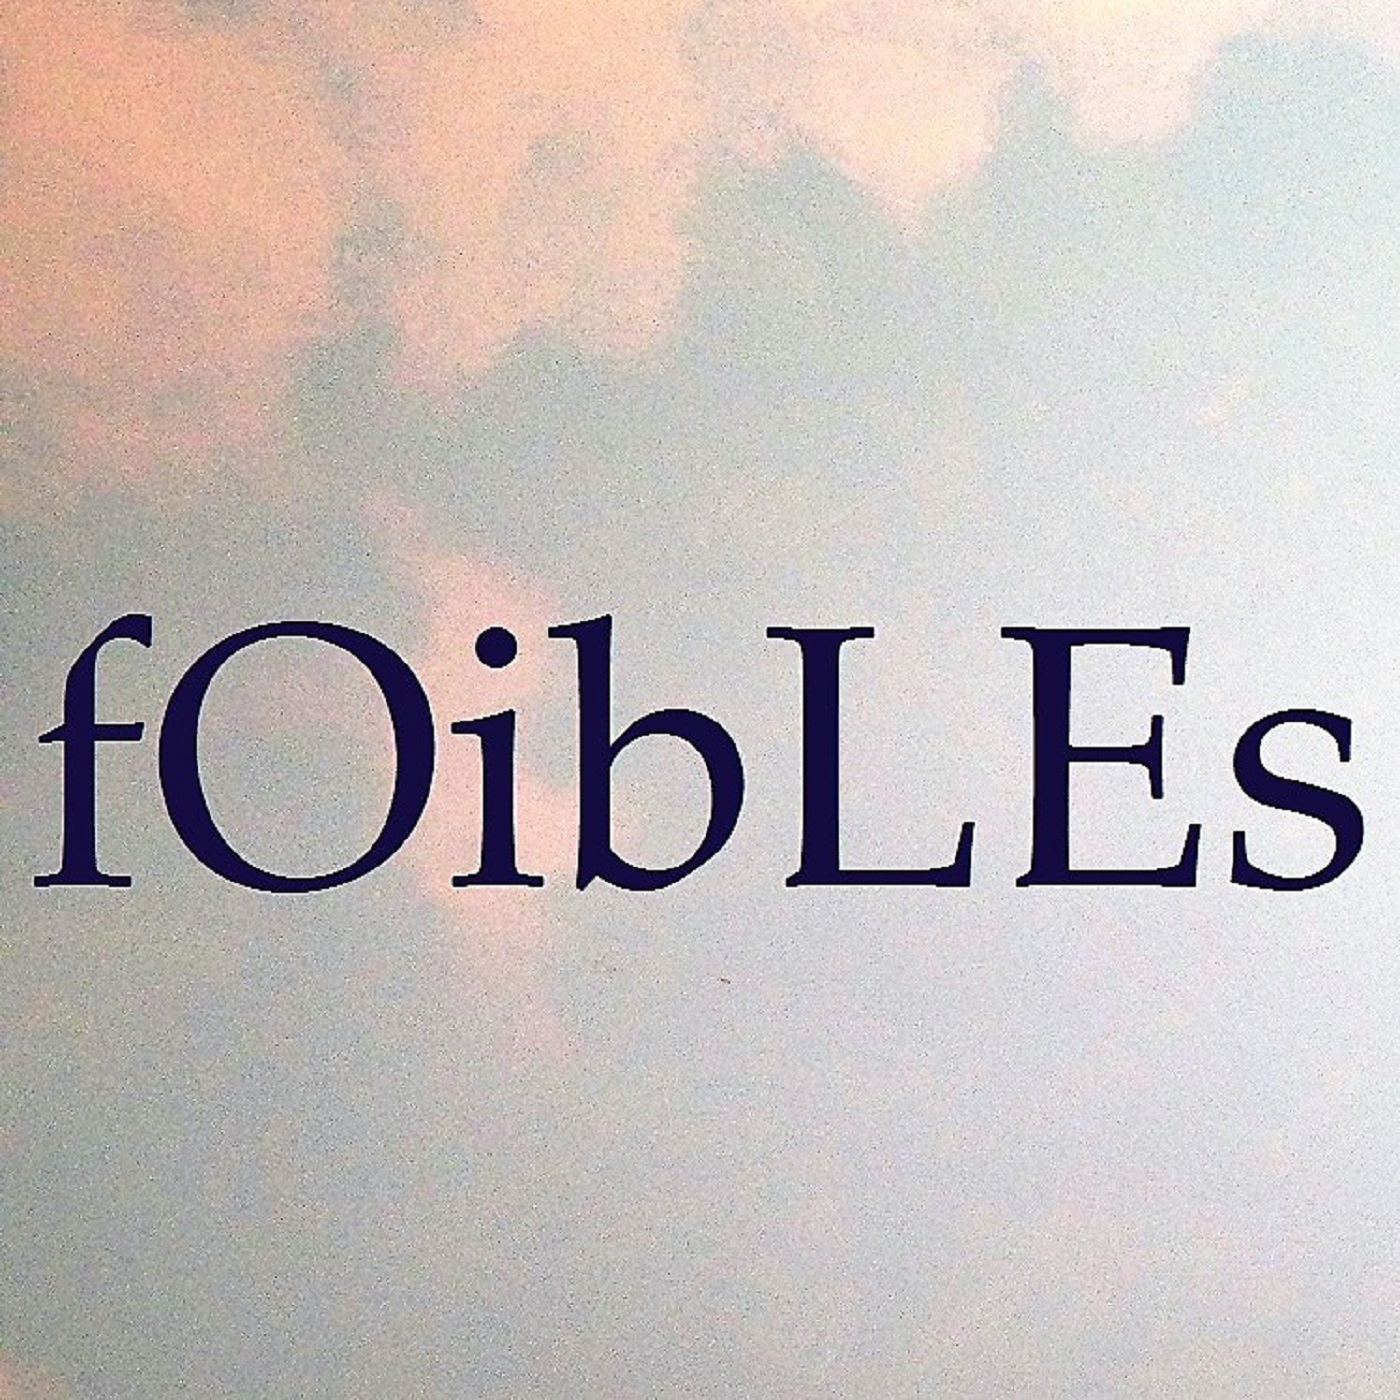 Foibles- Episode 5 Three Movies You Must Love to Date my Daughter